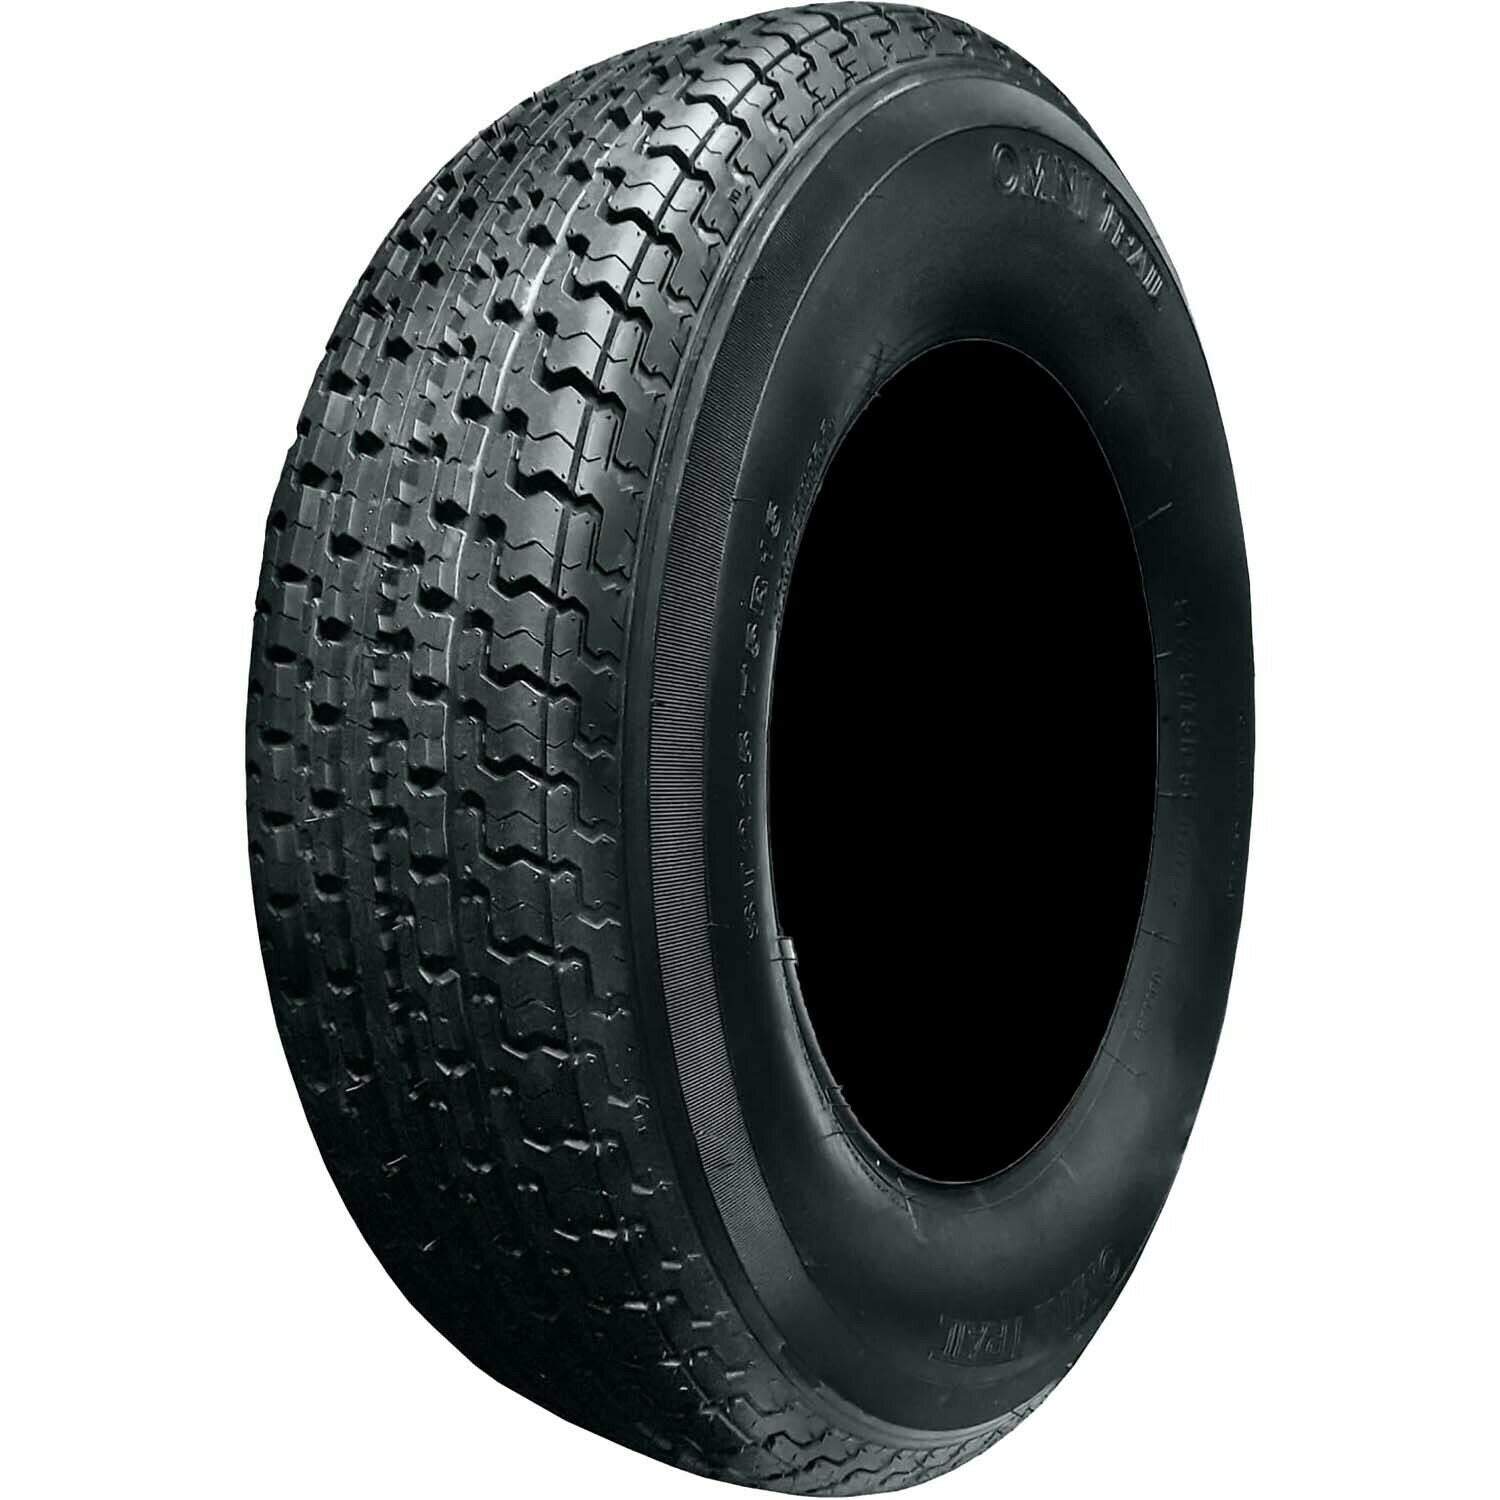 Omni Trail Radial Trailer Tire LRE 10ply ST225/75R15